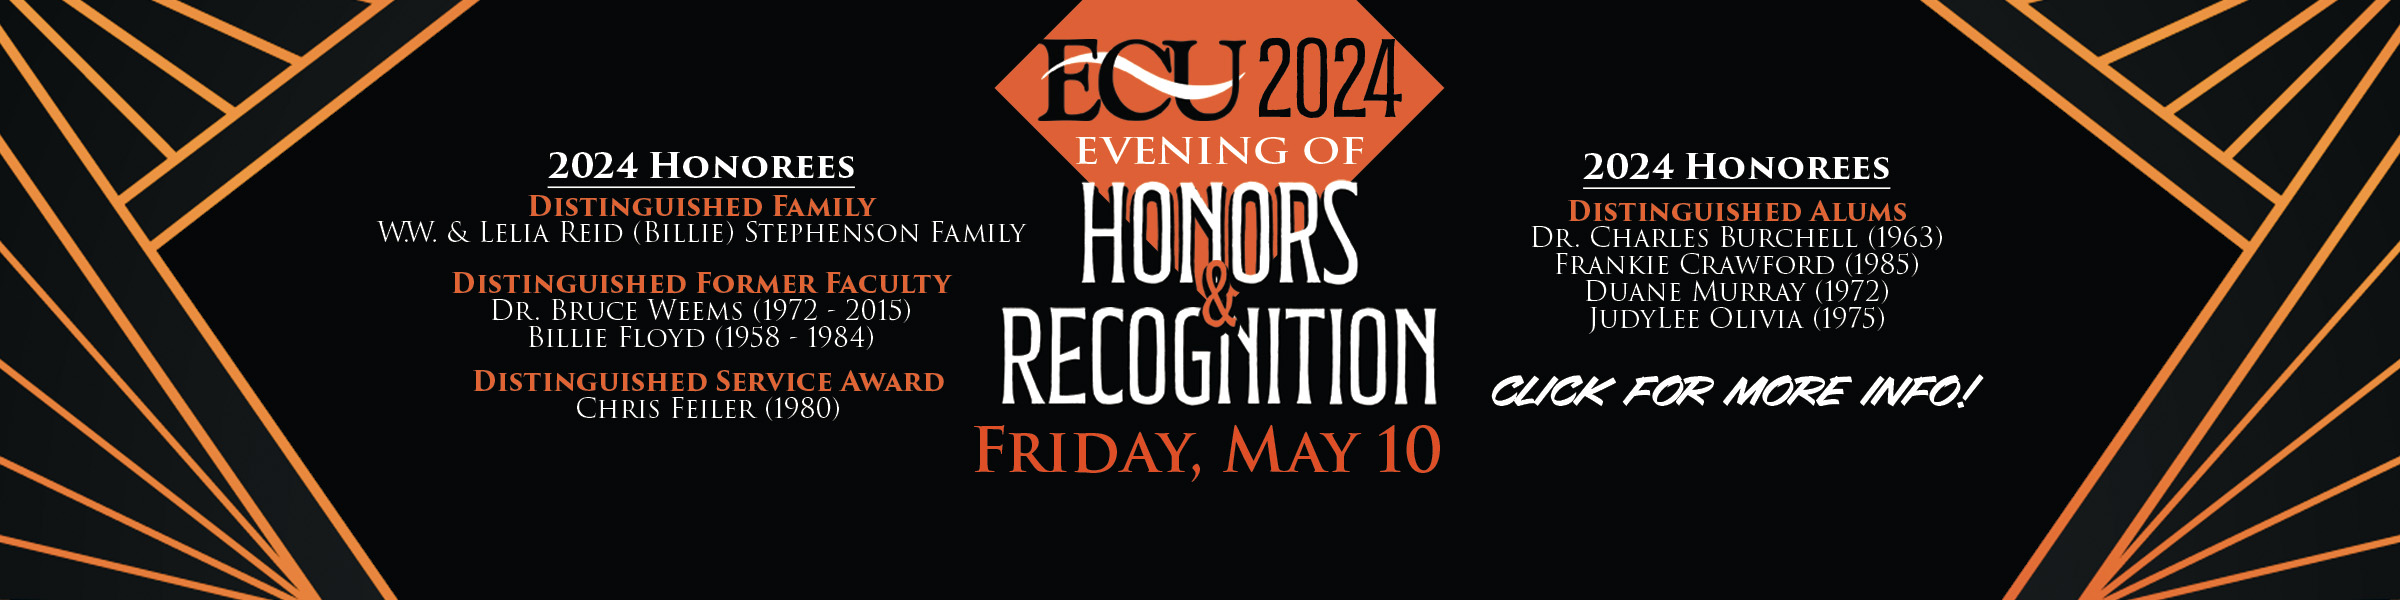 Evening of Honors Slider (click for more info)